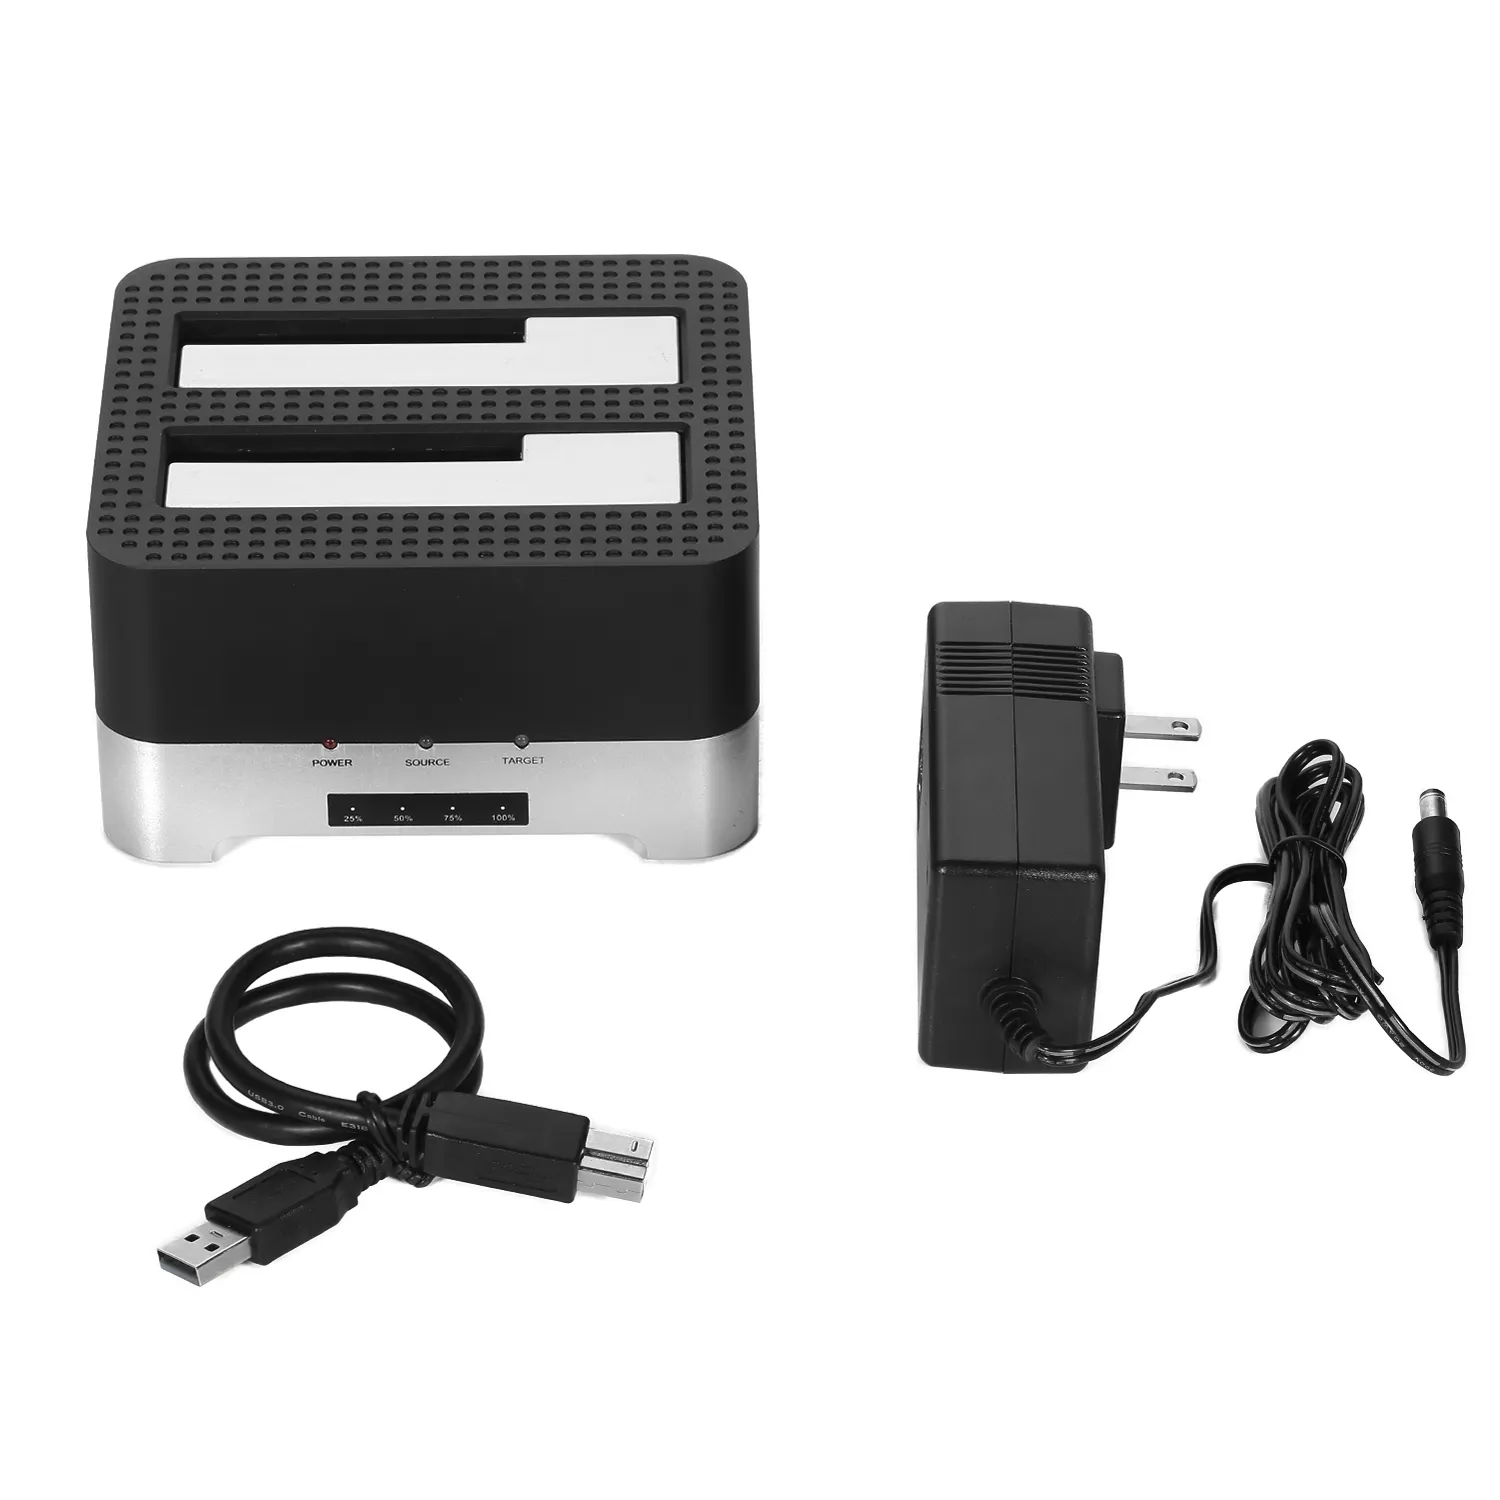 Dual Slots USB 2.0 to SATA IDE HDD Docking Station with Card Reader for 2.5 3.5 Inch IDE SATA Hard Drive